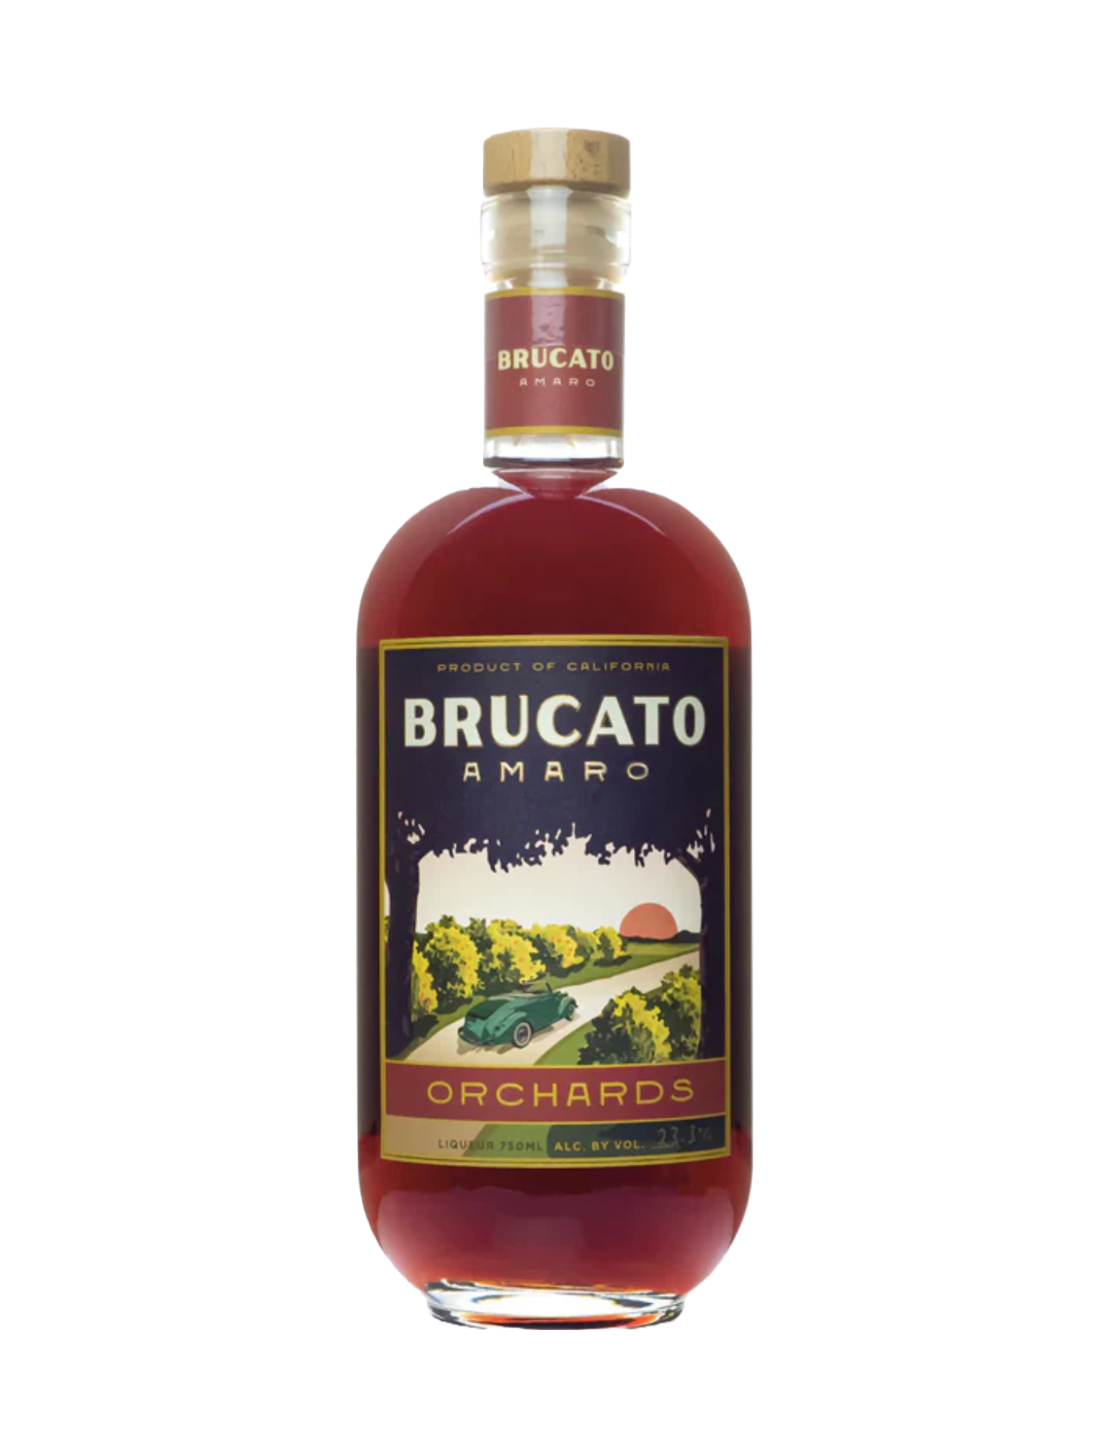 Brucato Orchards Amaro bottle, a symphony of Californian botanicals, fruits, and nuts, exuding complex flavors.